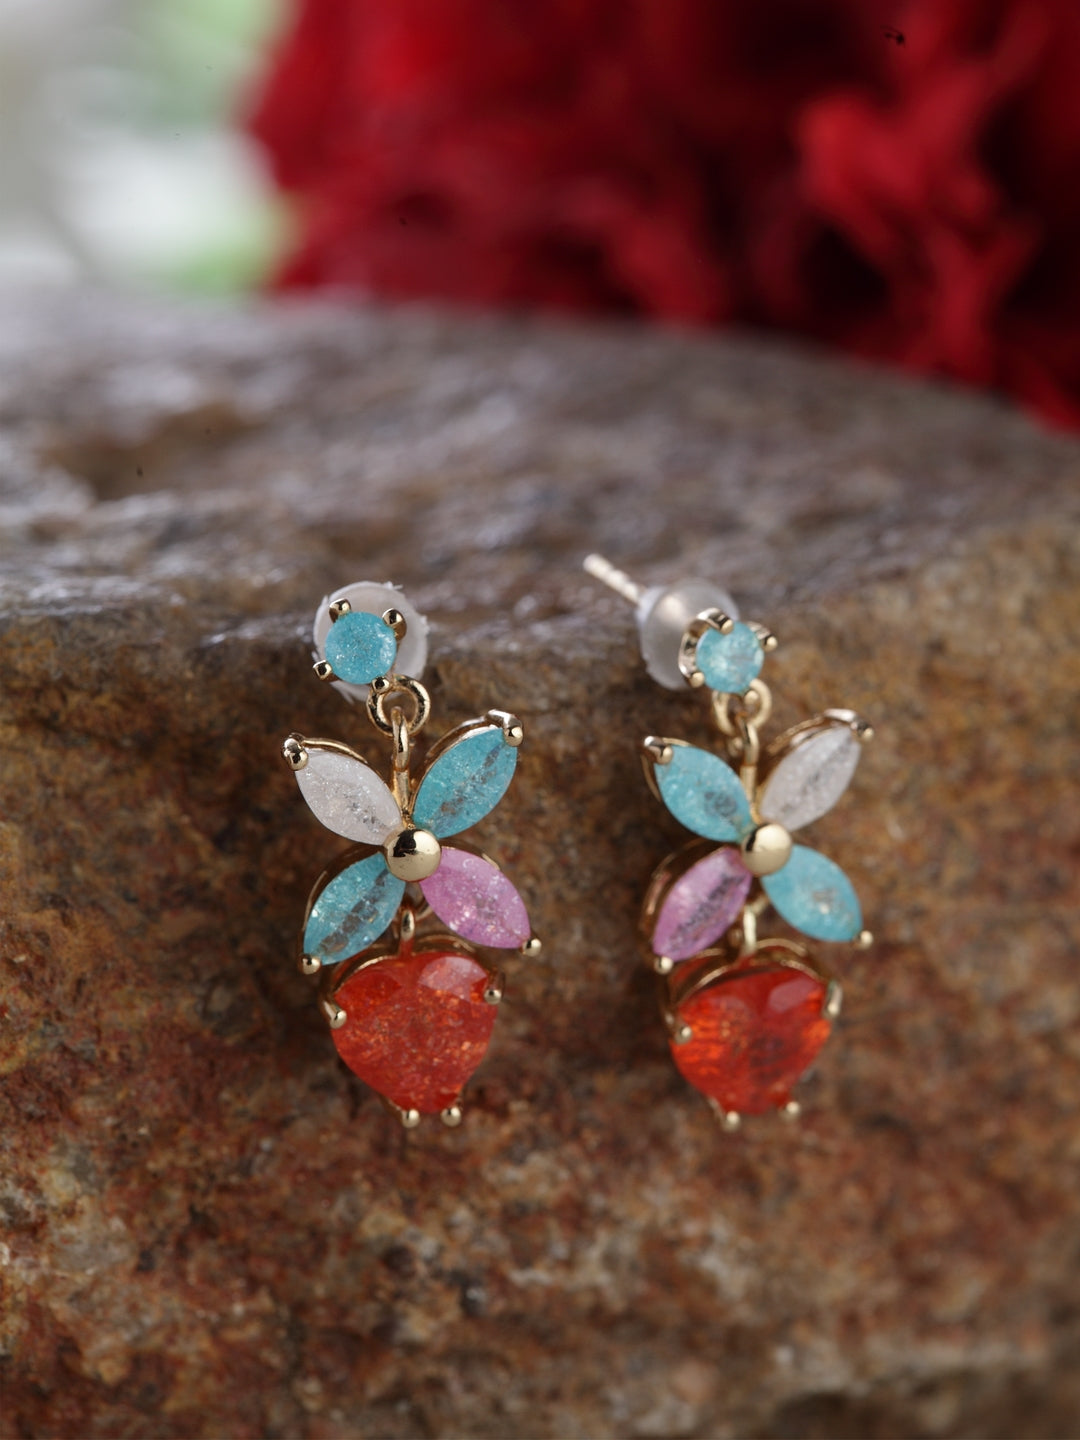 Gold-Plated Stones Studded Floral Patterned Studs Earrings in Multicolor